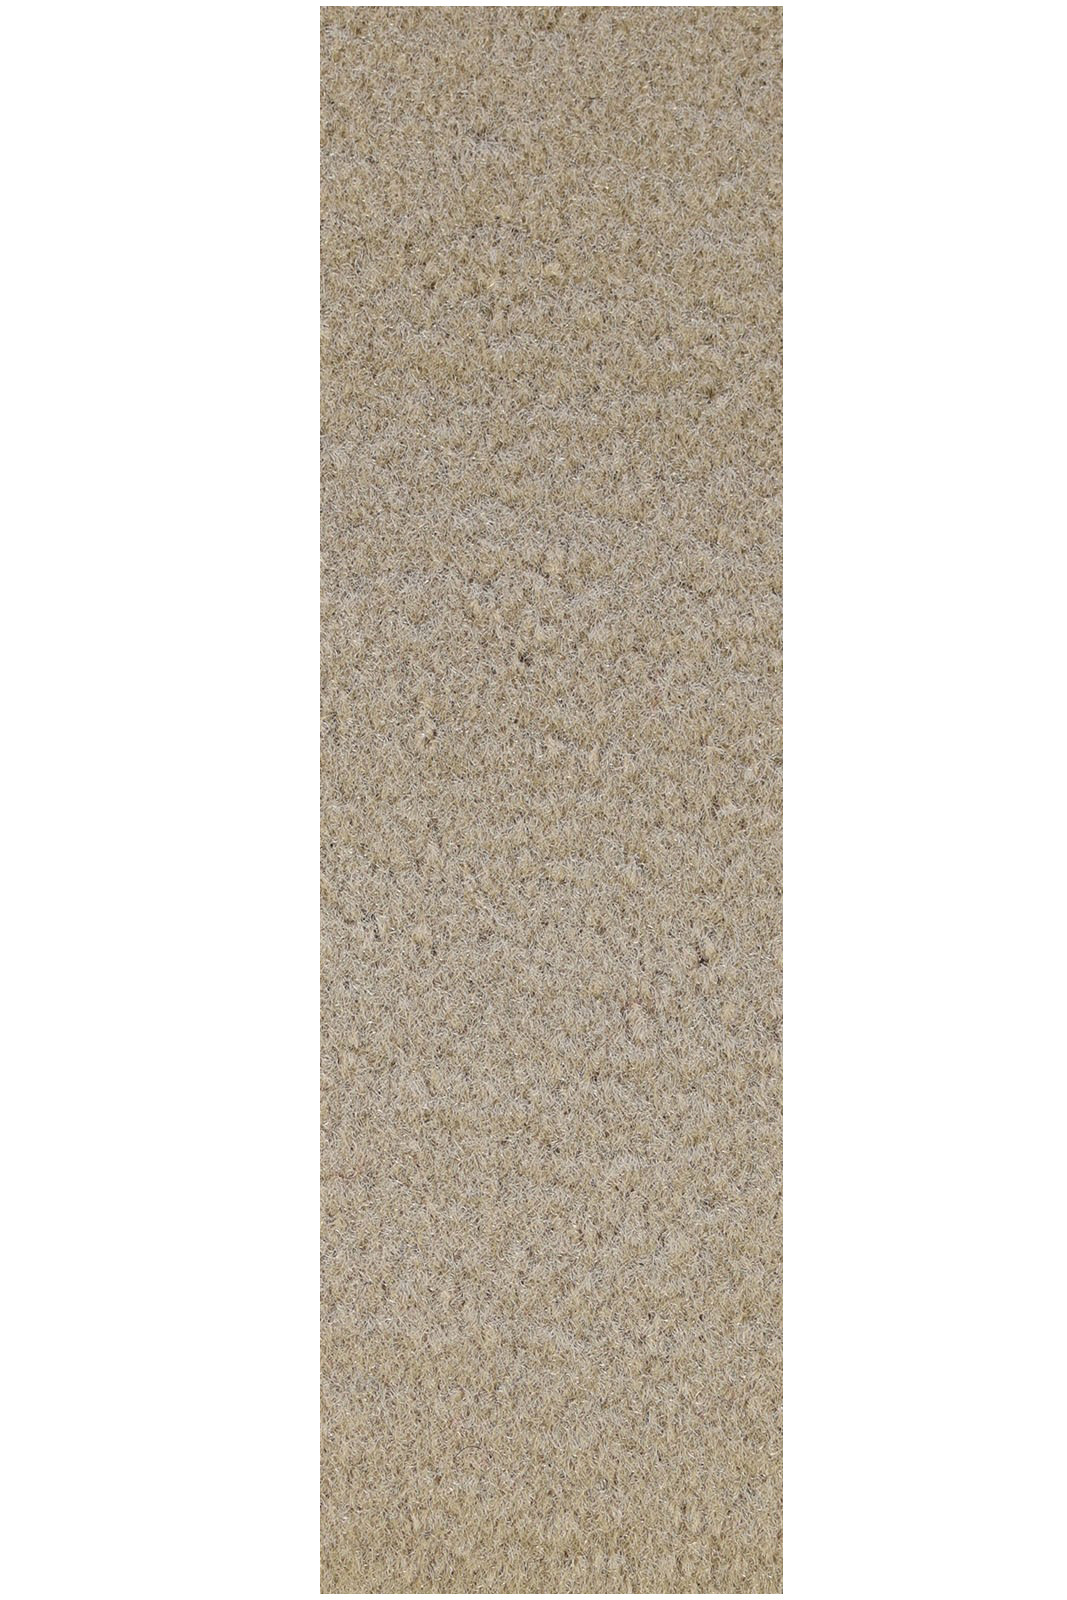 Commercial Indoor/Outdoor Beige Custom Size Runner 4' x 24' - Area Rug with Rubber Marine Backing for Patio, Porch, Deck, Boat, Basement or Garage with Premium Bound Polyester Edges - image 1 of 1